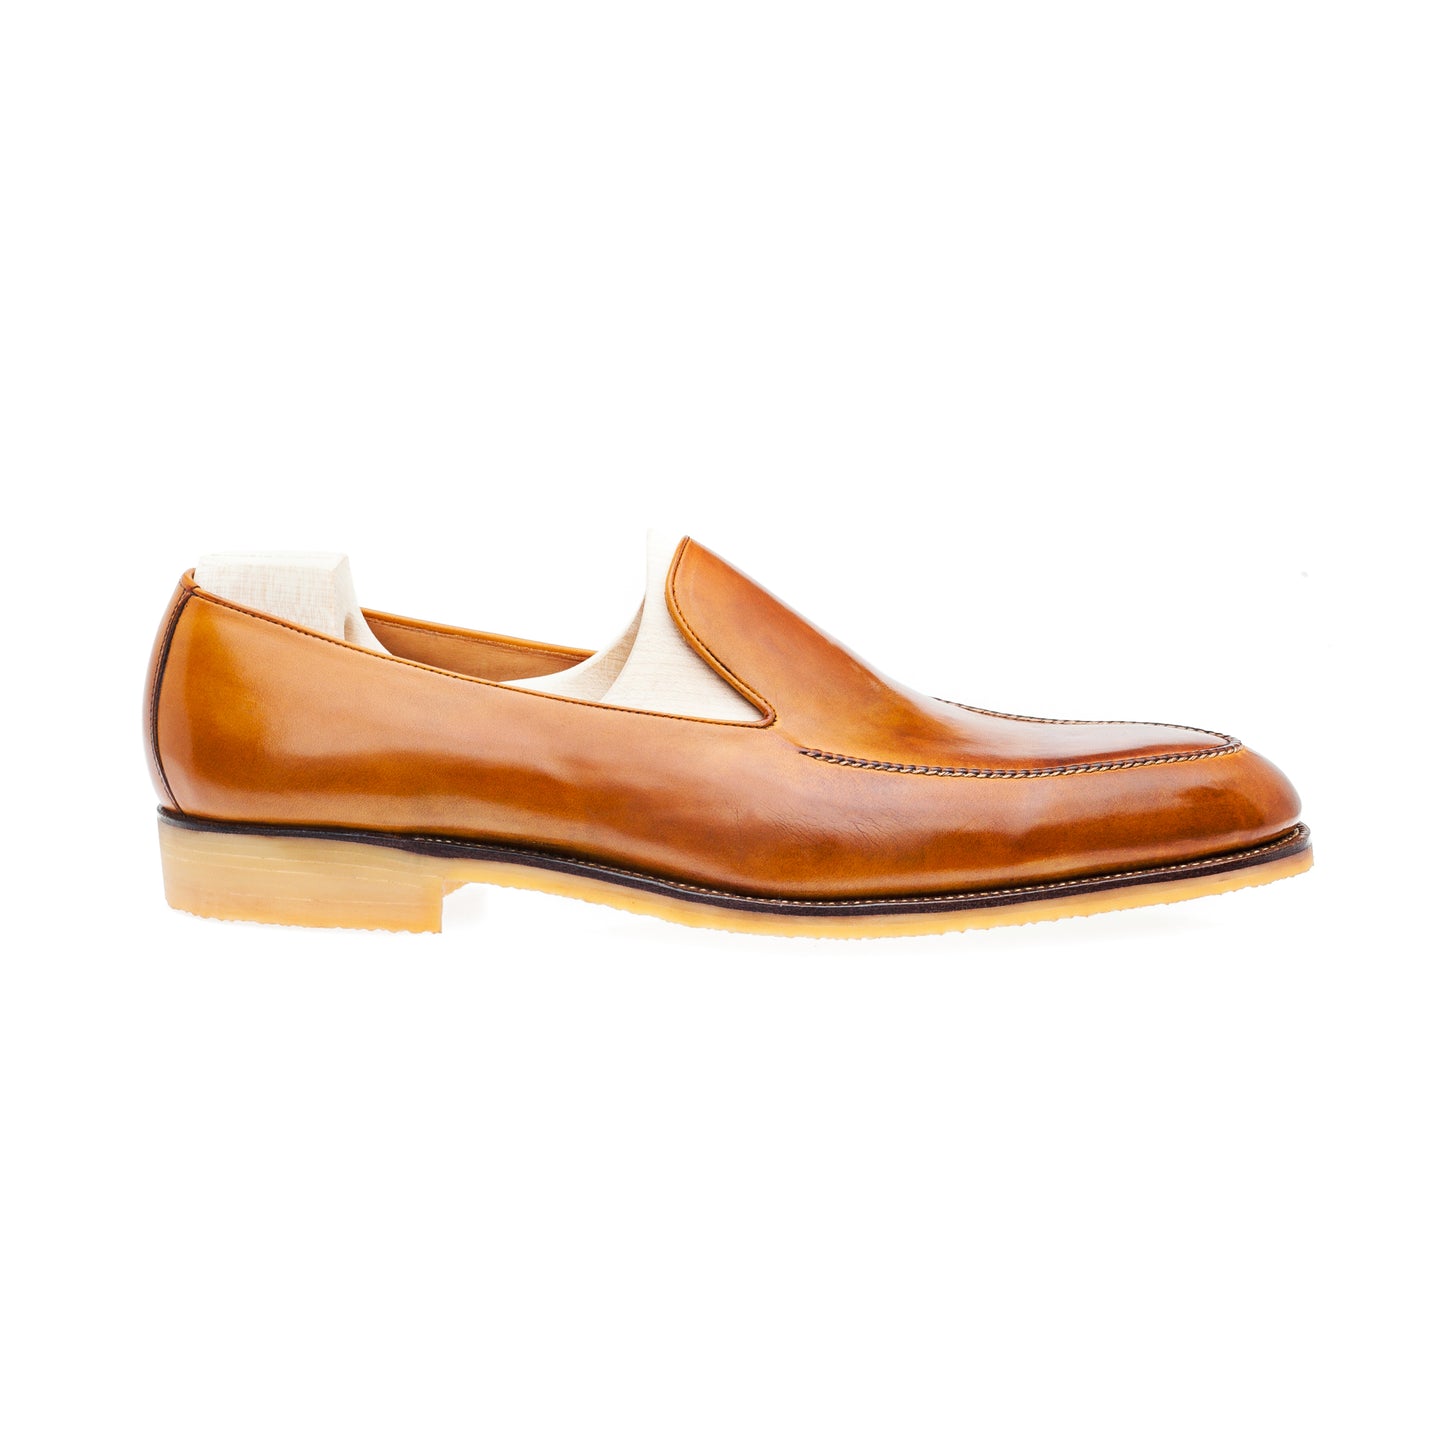 Elegant Loafer with hand stitched apron and crep sole